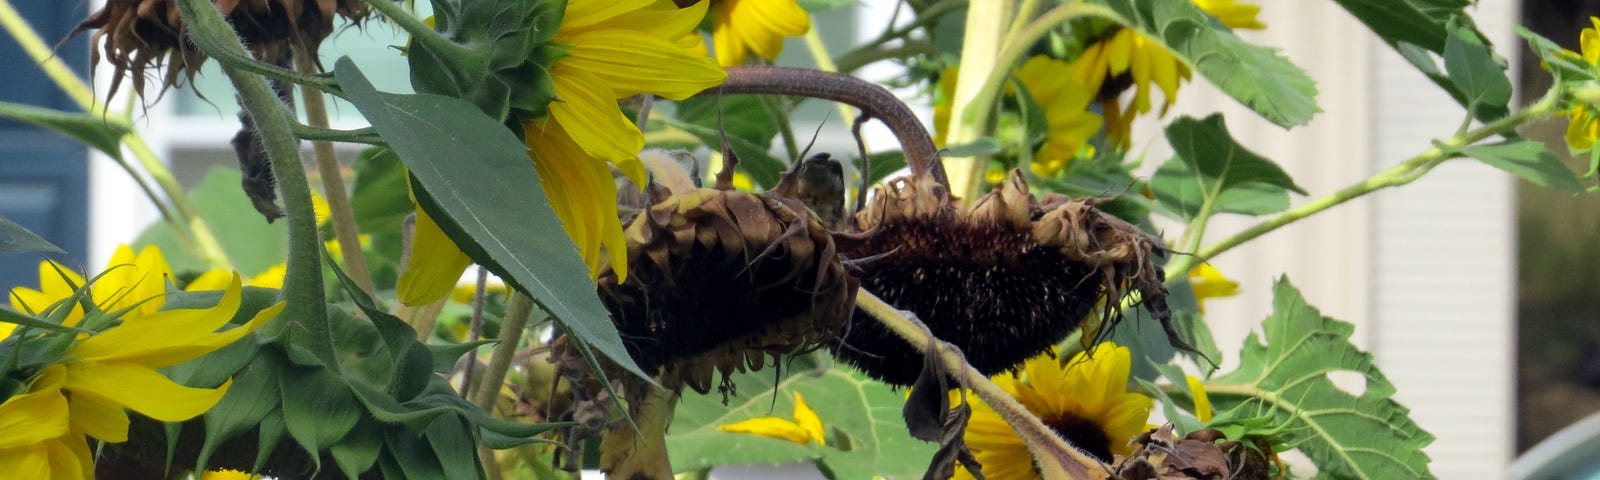 Brown sunflower heads heavy with seed bending down among sunflowers in full bloom.